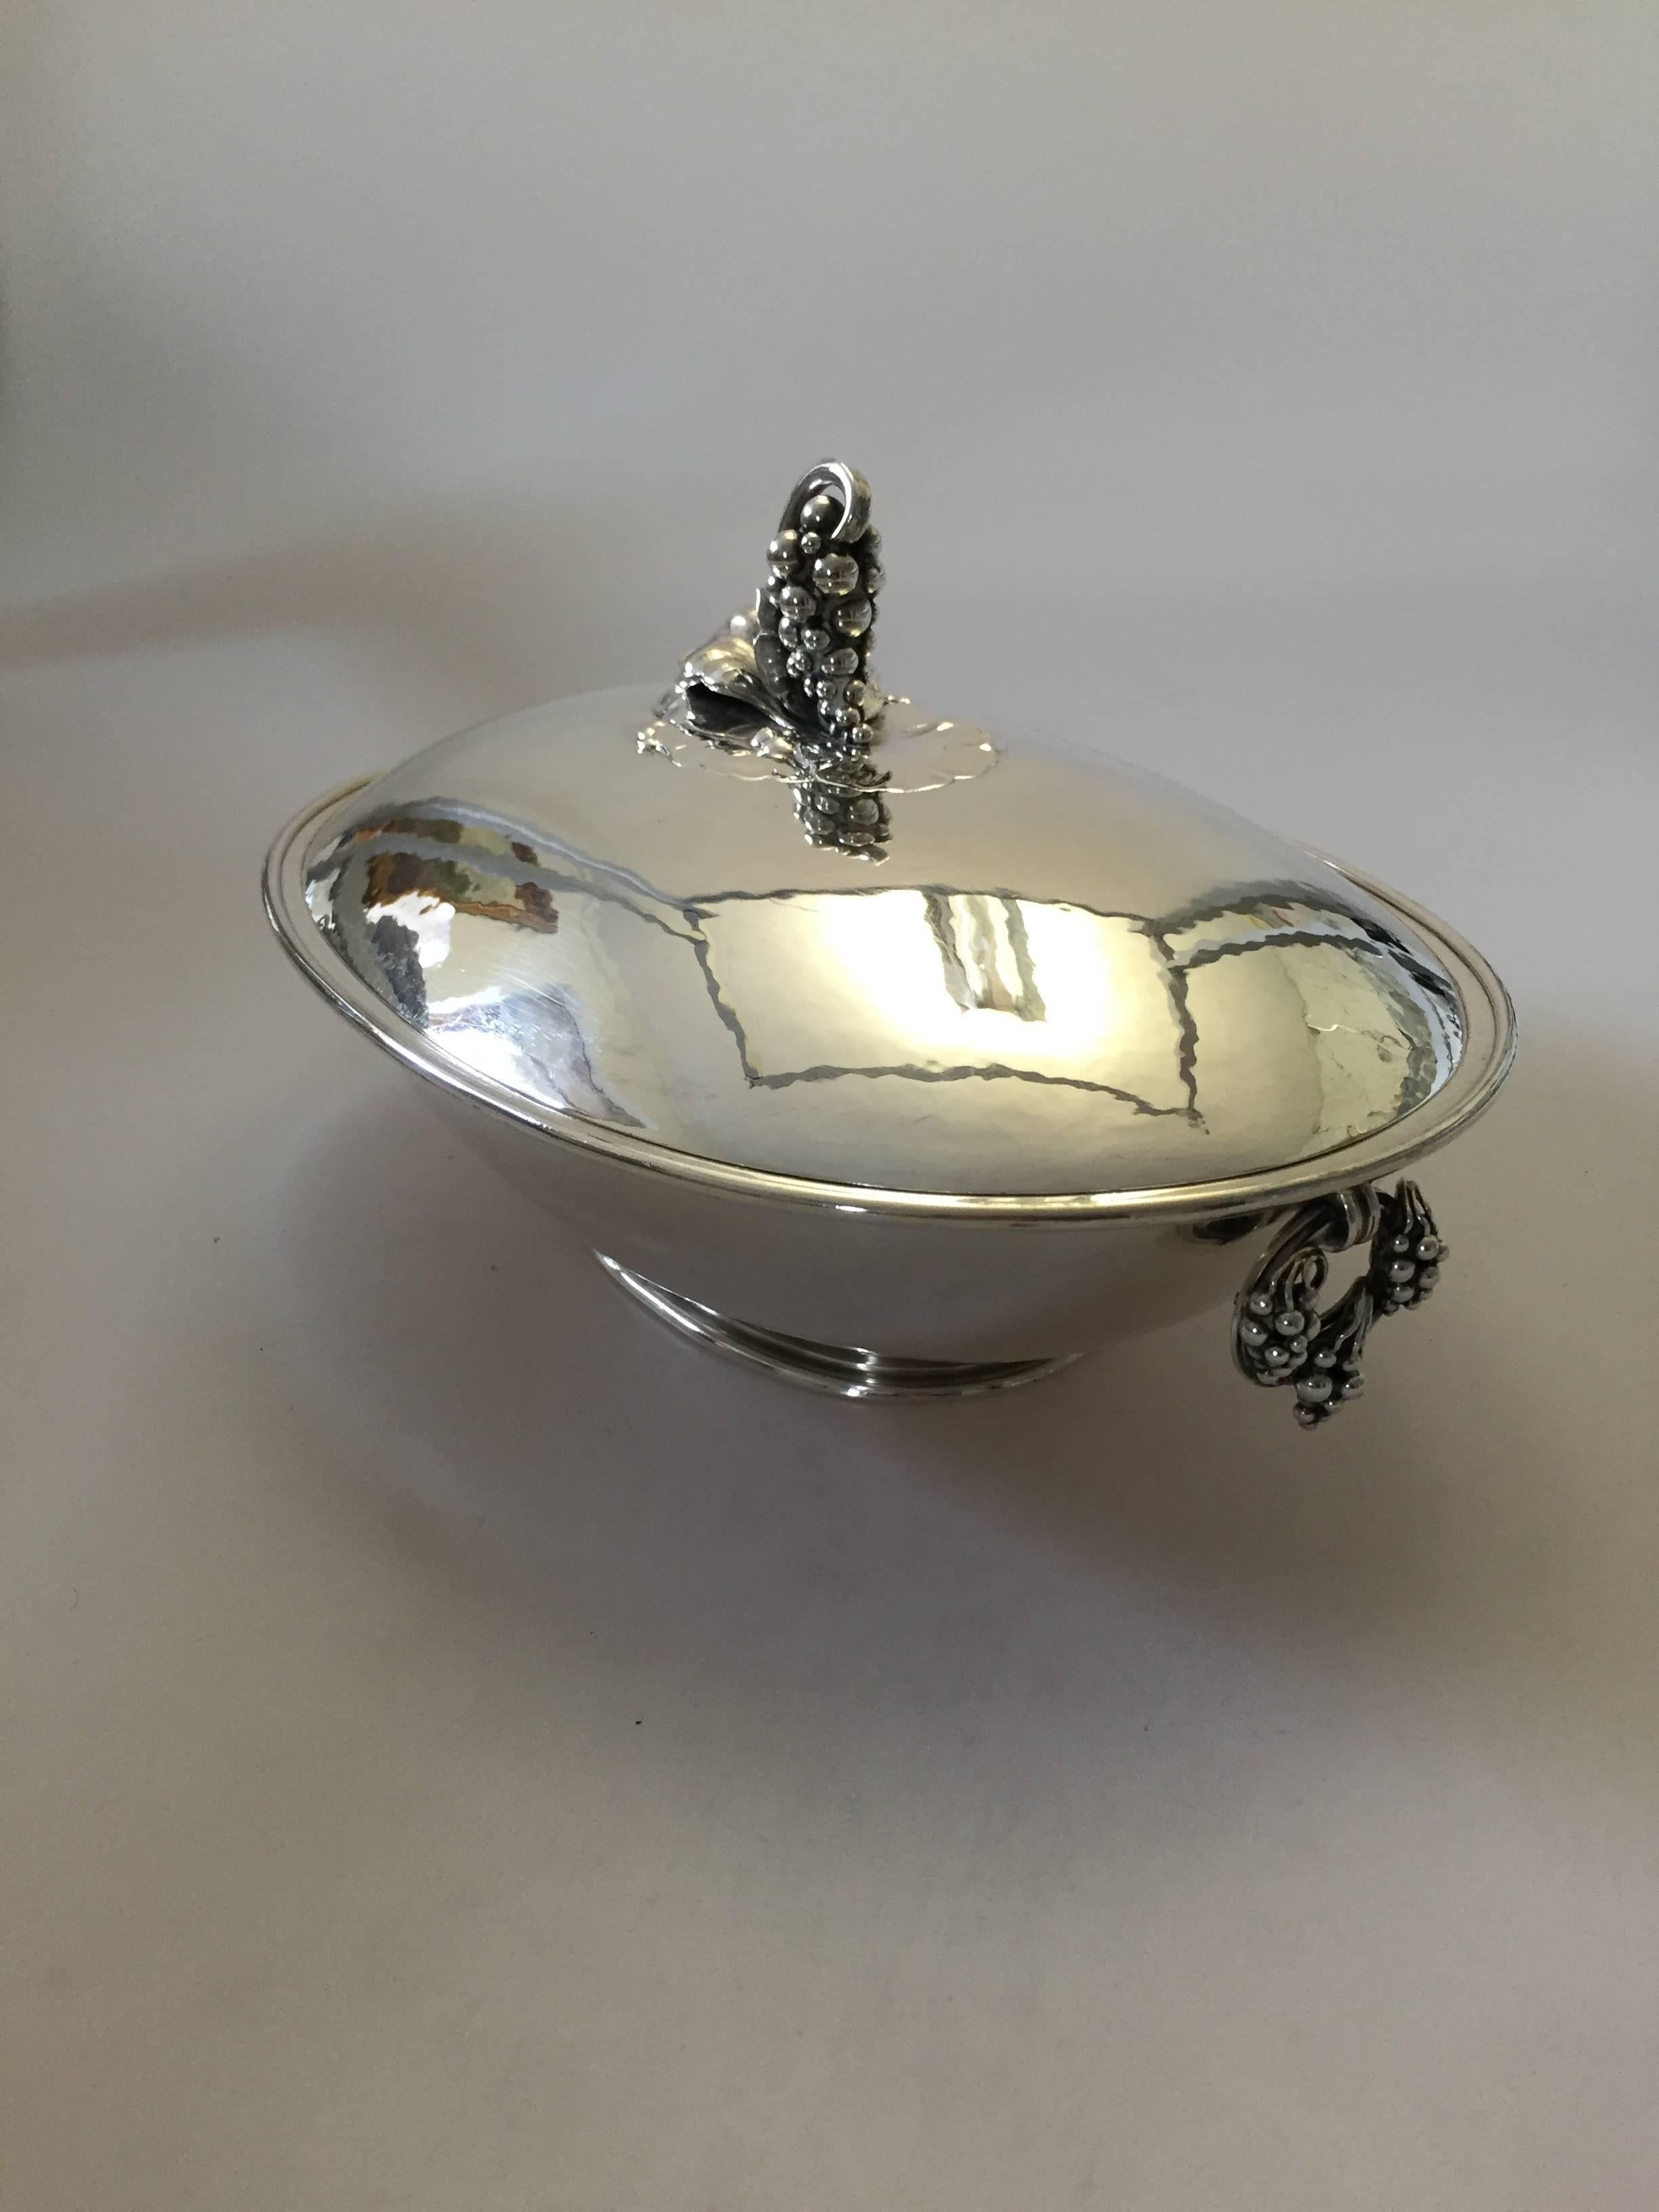 Georg Jensen sterling silver oval serving dish with cover with grape ornament. The dish measures 10 3/8